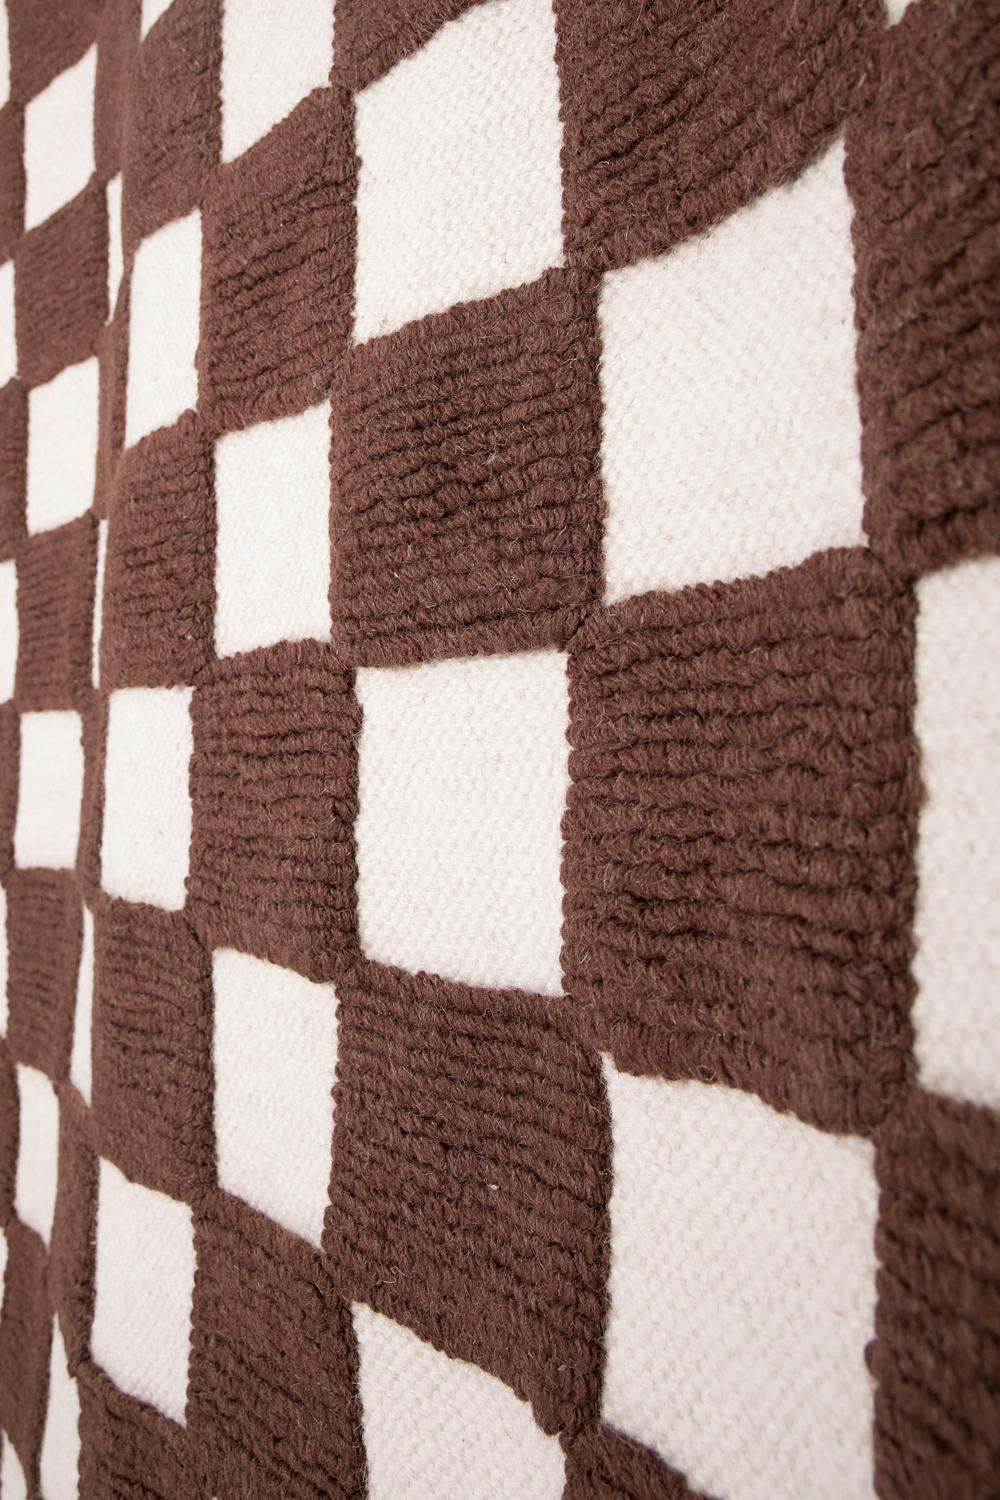 This rug has been ethically hand woven in the finest wool yarns by artisans in north of India, using a traditional weaving technique which defines the design.
The white part is handwoven in flatweave with a thickness of 6mm and the brown part is